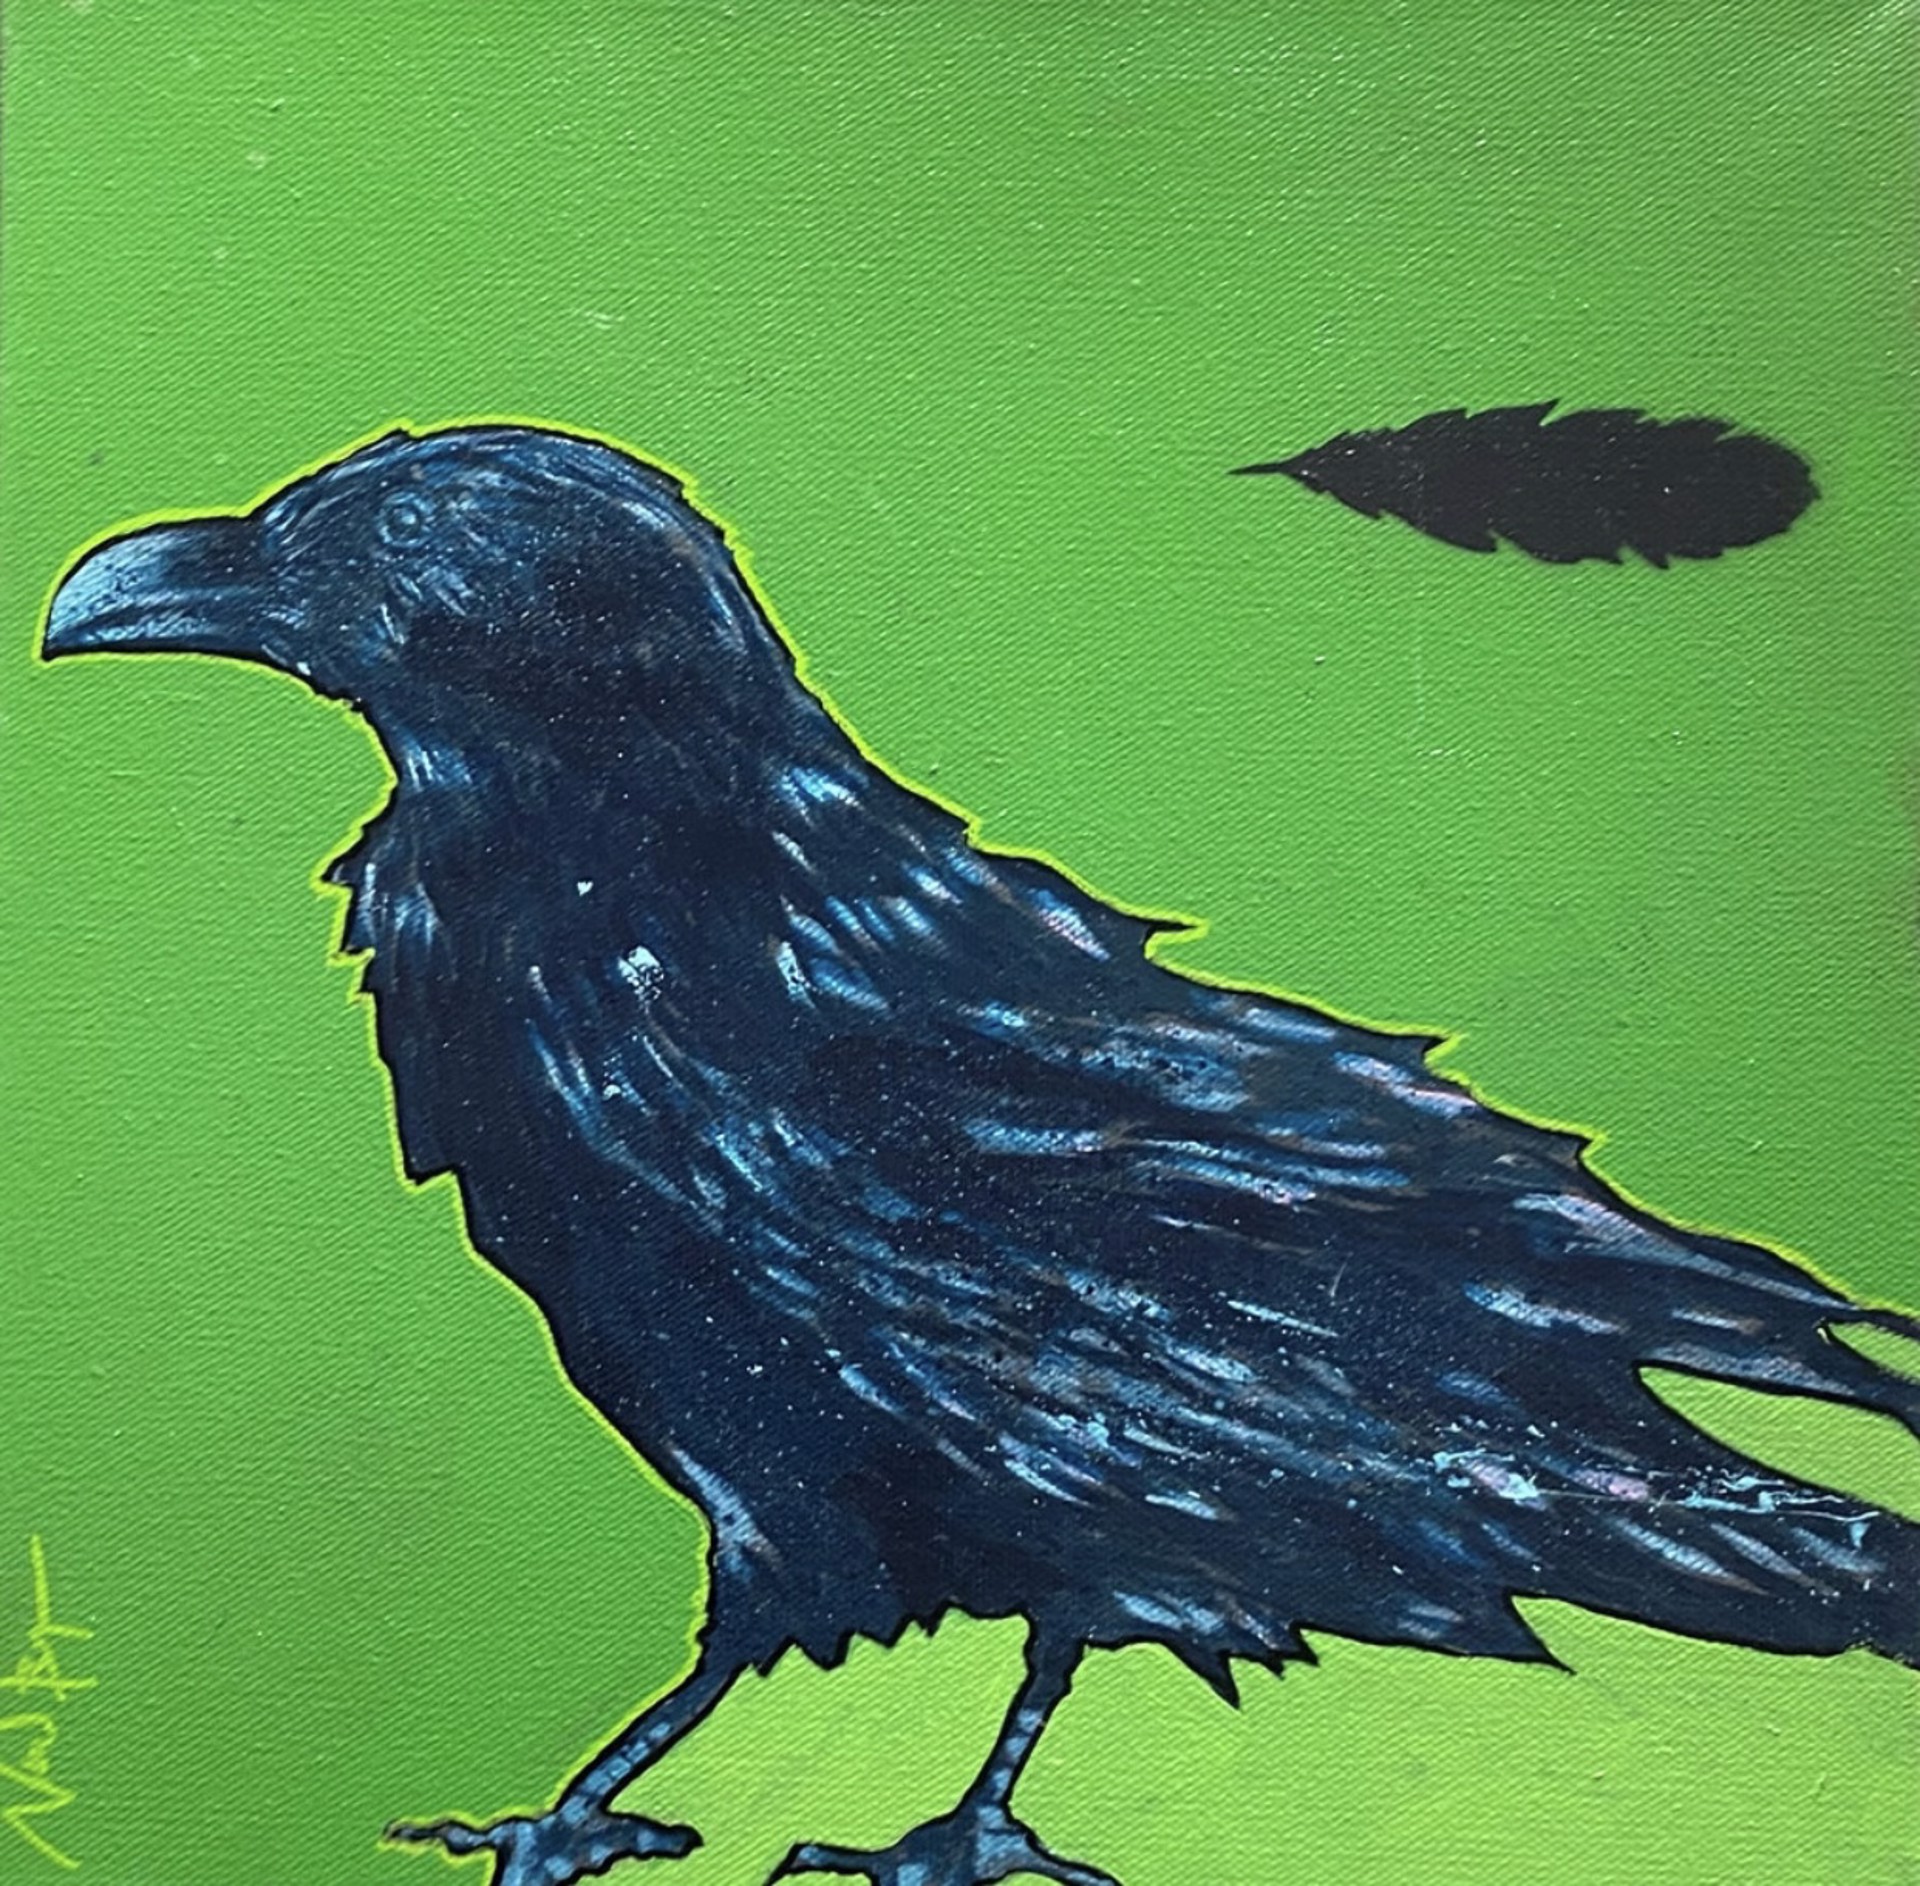 Raven - Birds of a Feather by Nocona Burgess